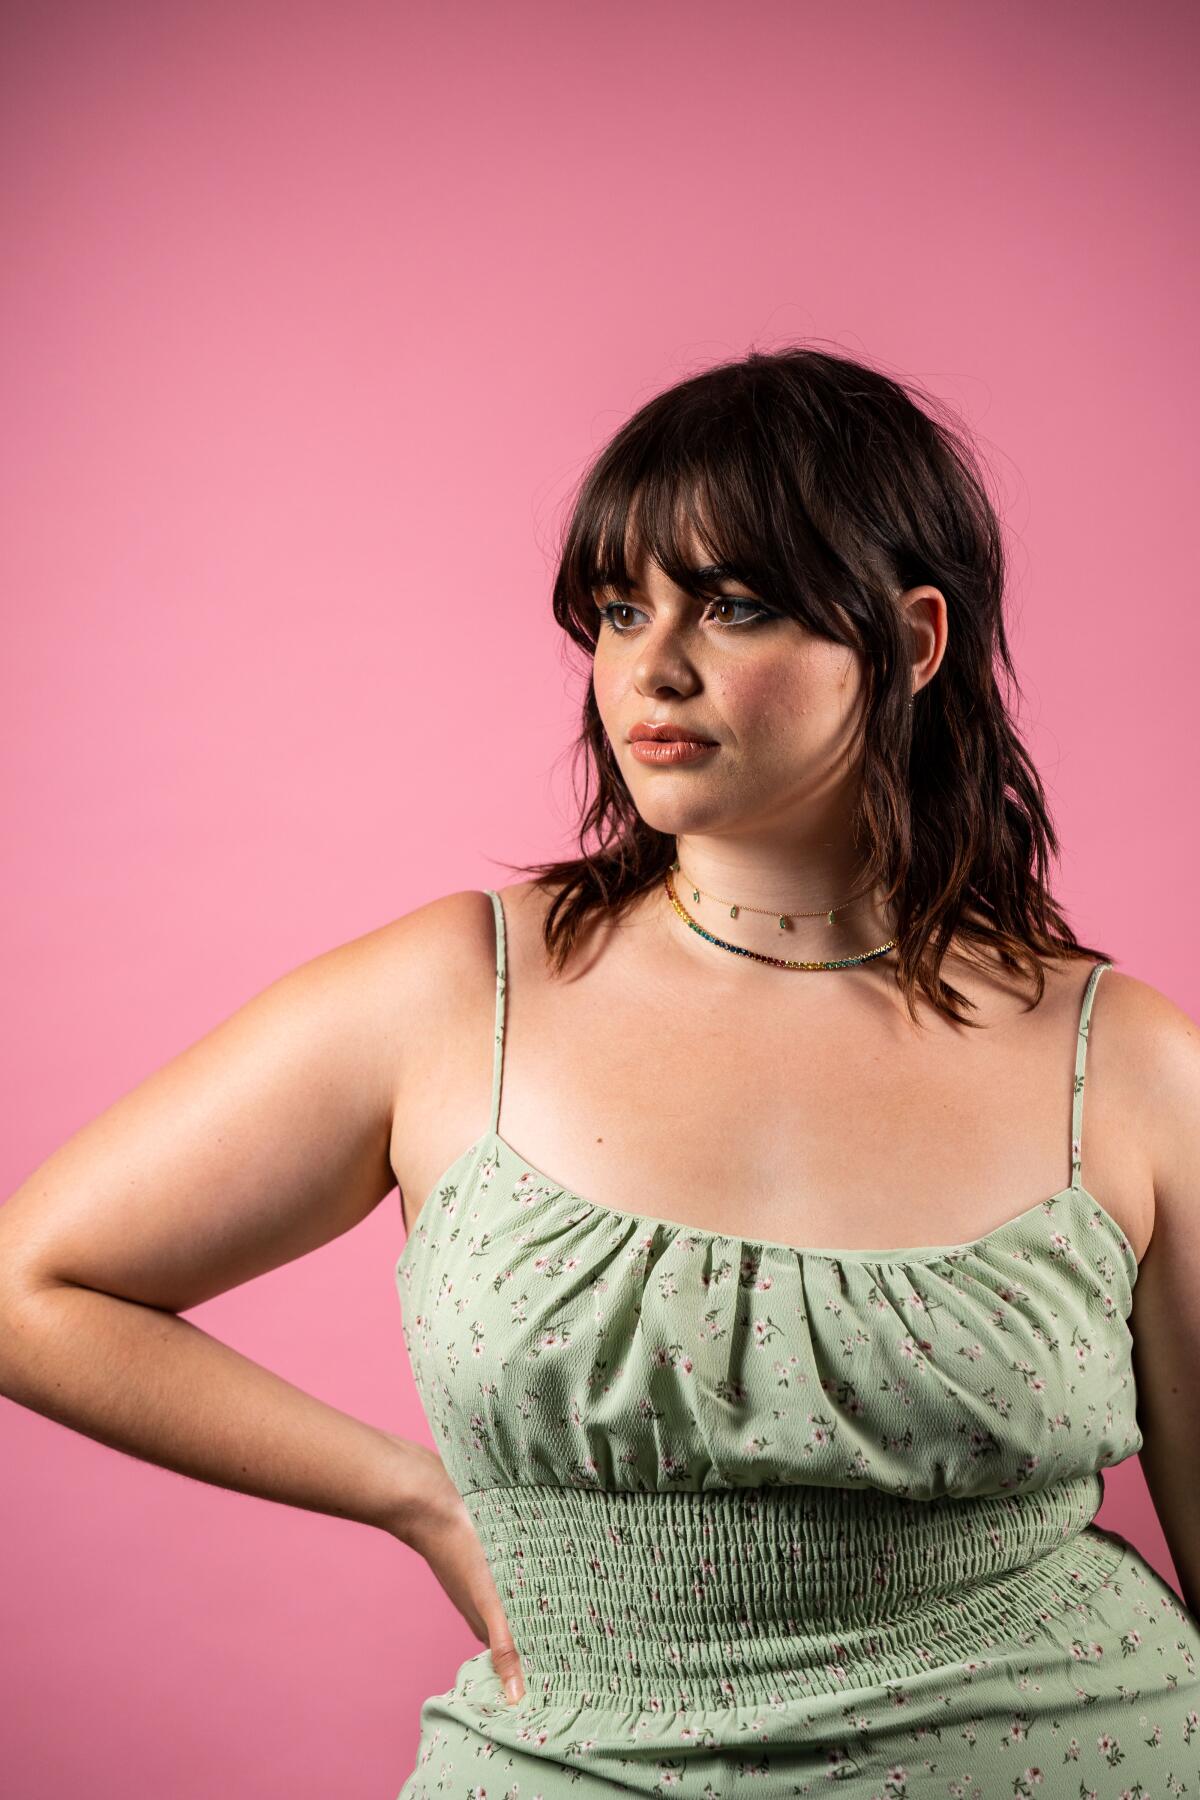 Barbie Ferreira poses, hand on one hip, in a green flowered, strappy sundress against a pink background.